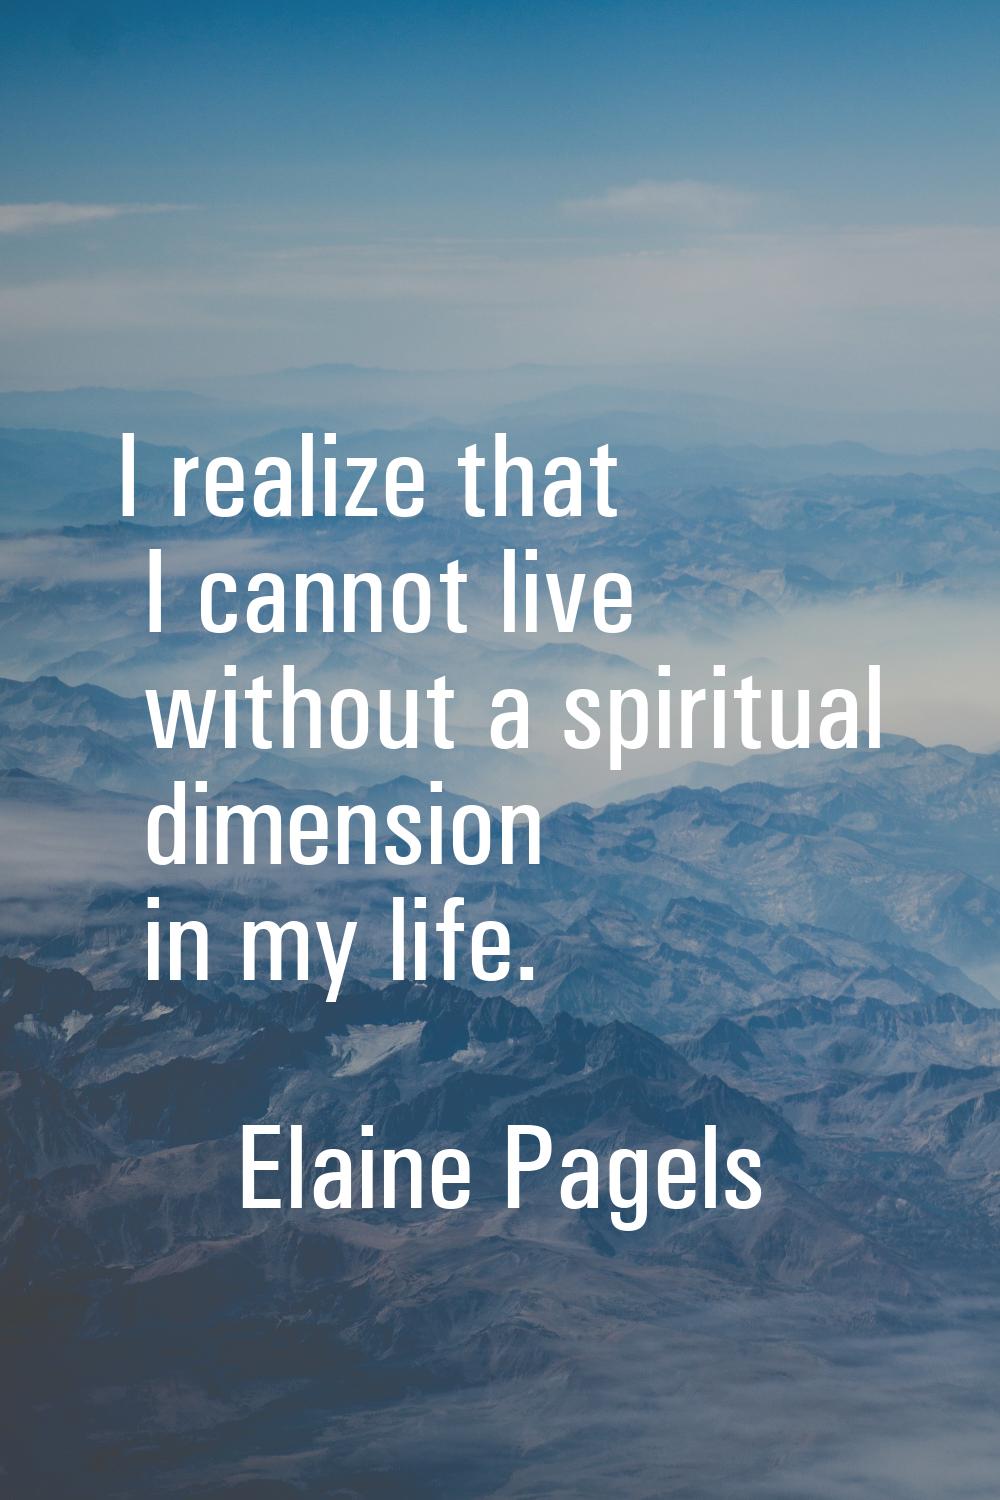 I realize that I cannot live without a spiritual dimension in my life.